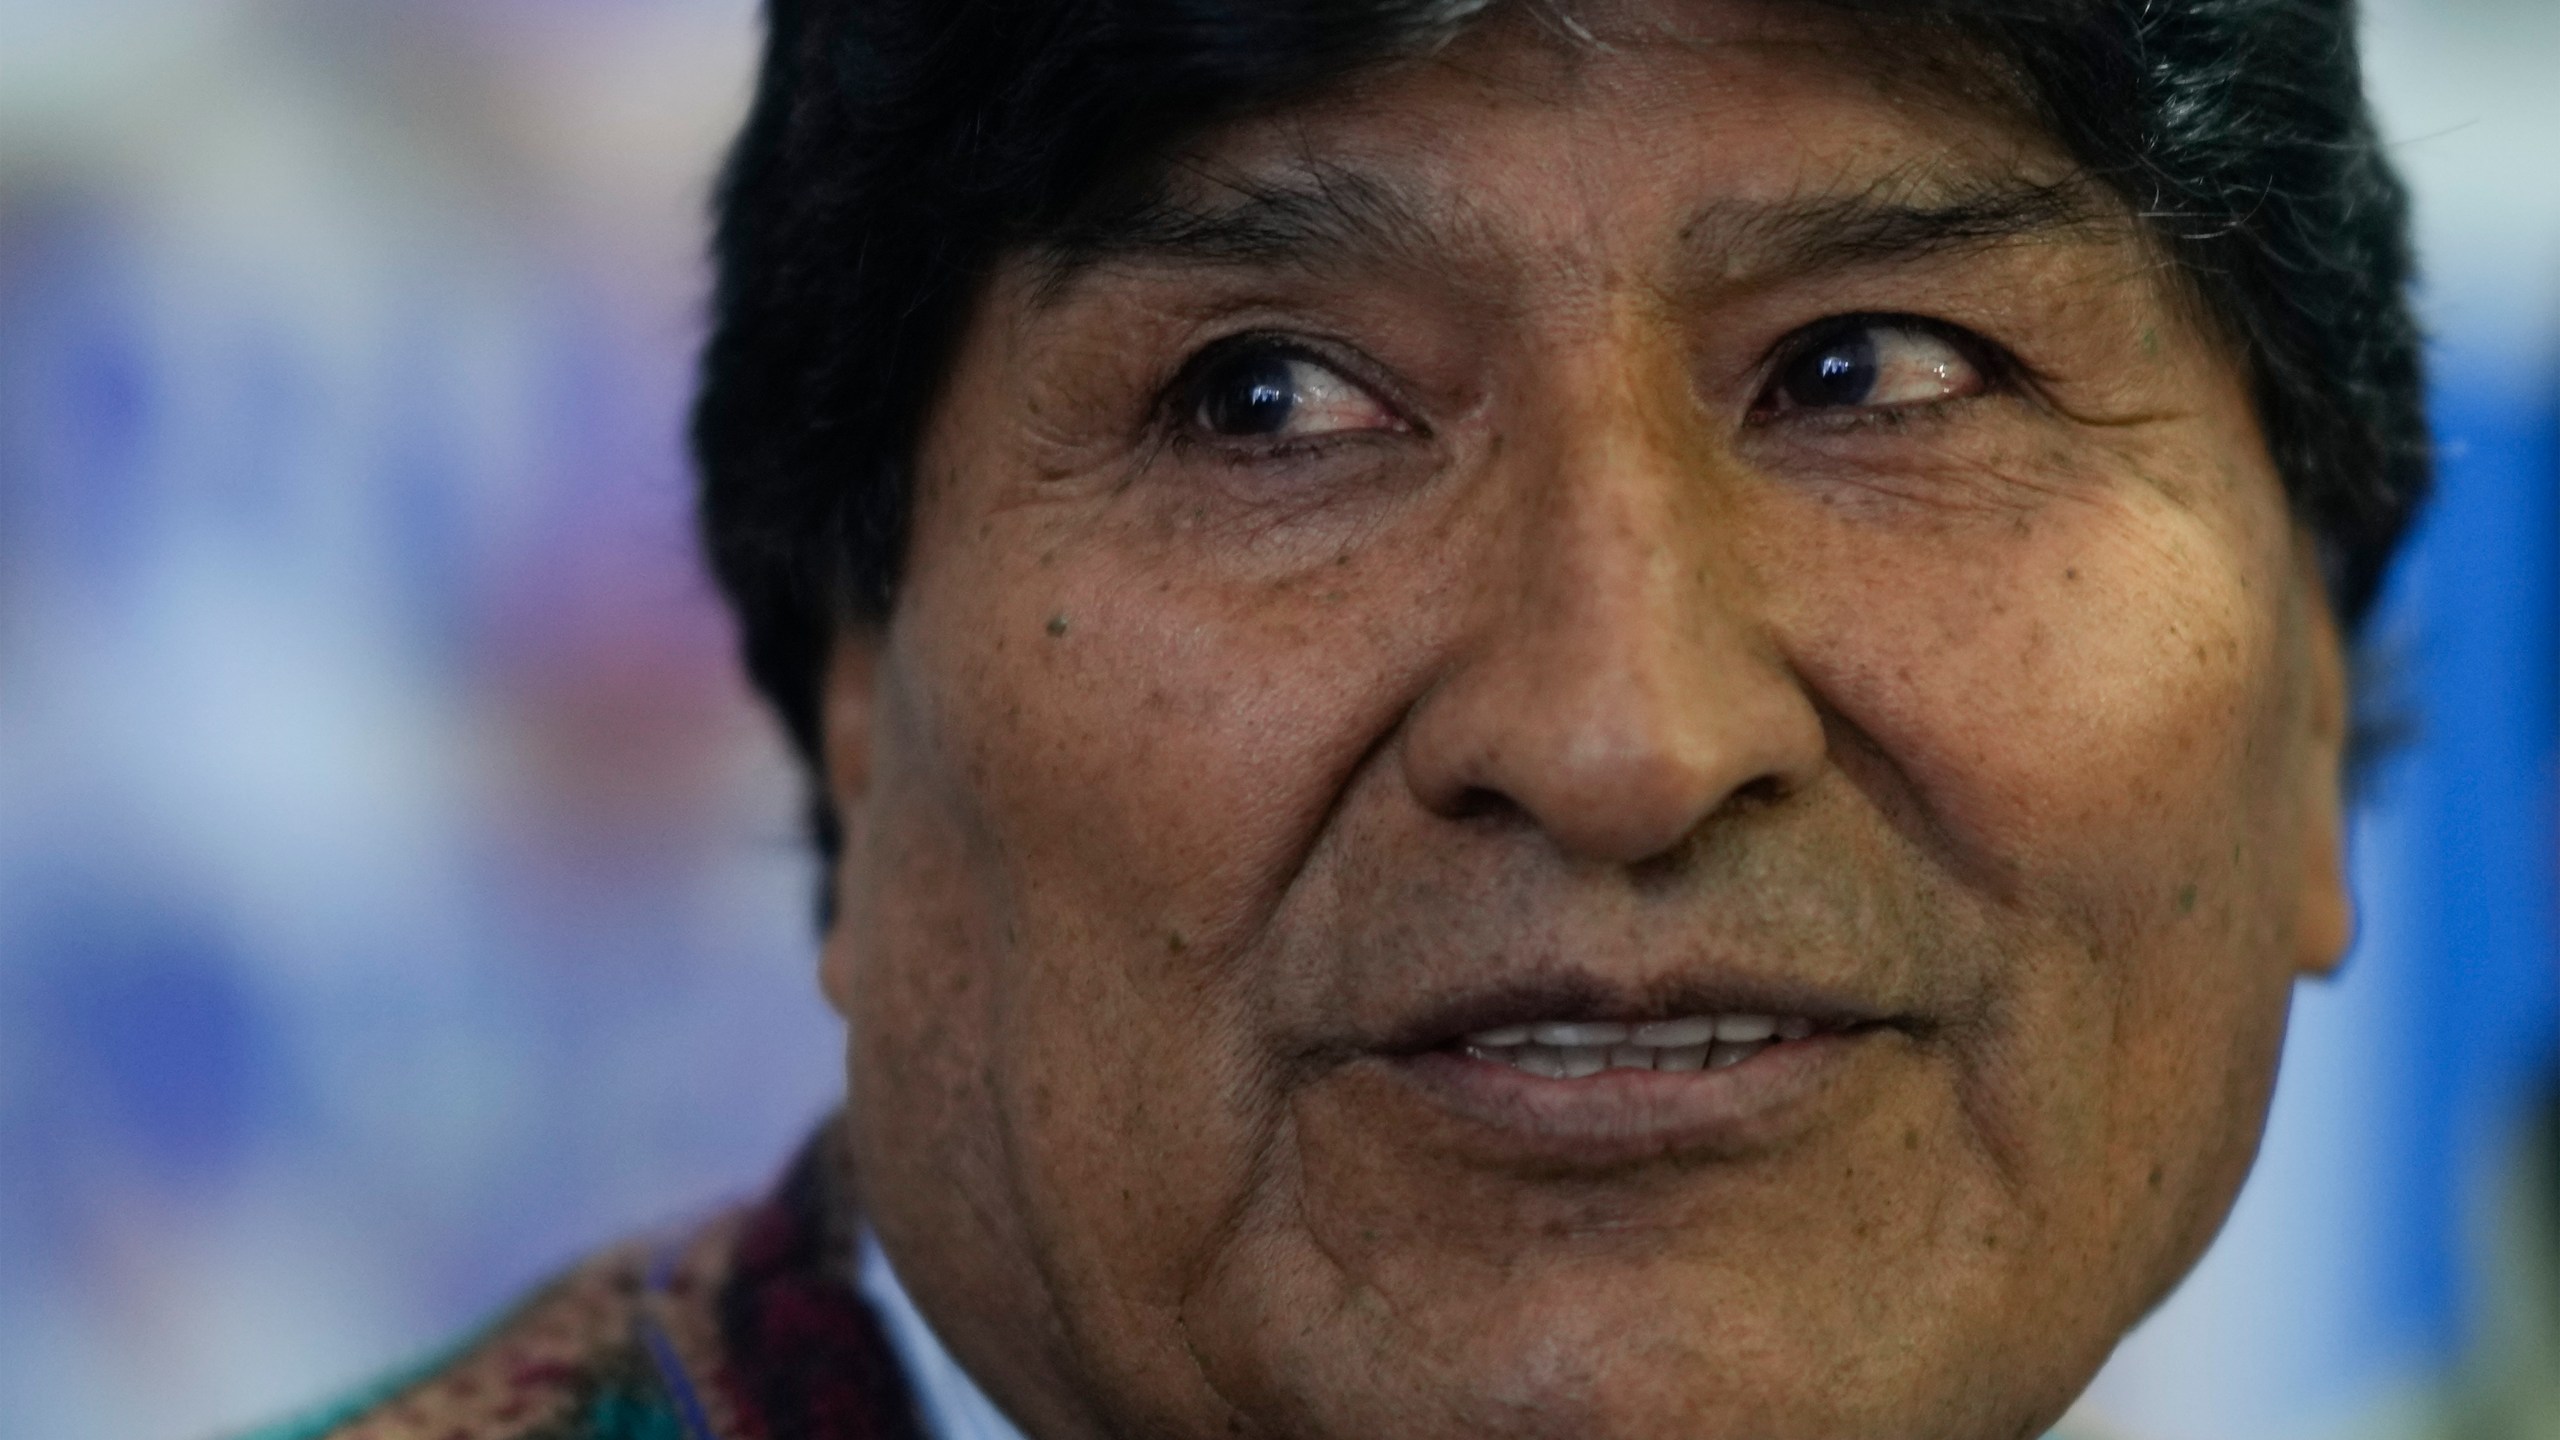 FILE - Evo Morales, former president and current president of the MAS party, gives a press conference in La Paz, Bolivia, April 11, 2024. Morales on Sunday, June 30, 2024 accused his political ally-turned-rival President Luis Arce of deceiving the Bolivian people by staging a “self-coup” the week prior. (AP Photo/Juan Karita, File)